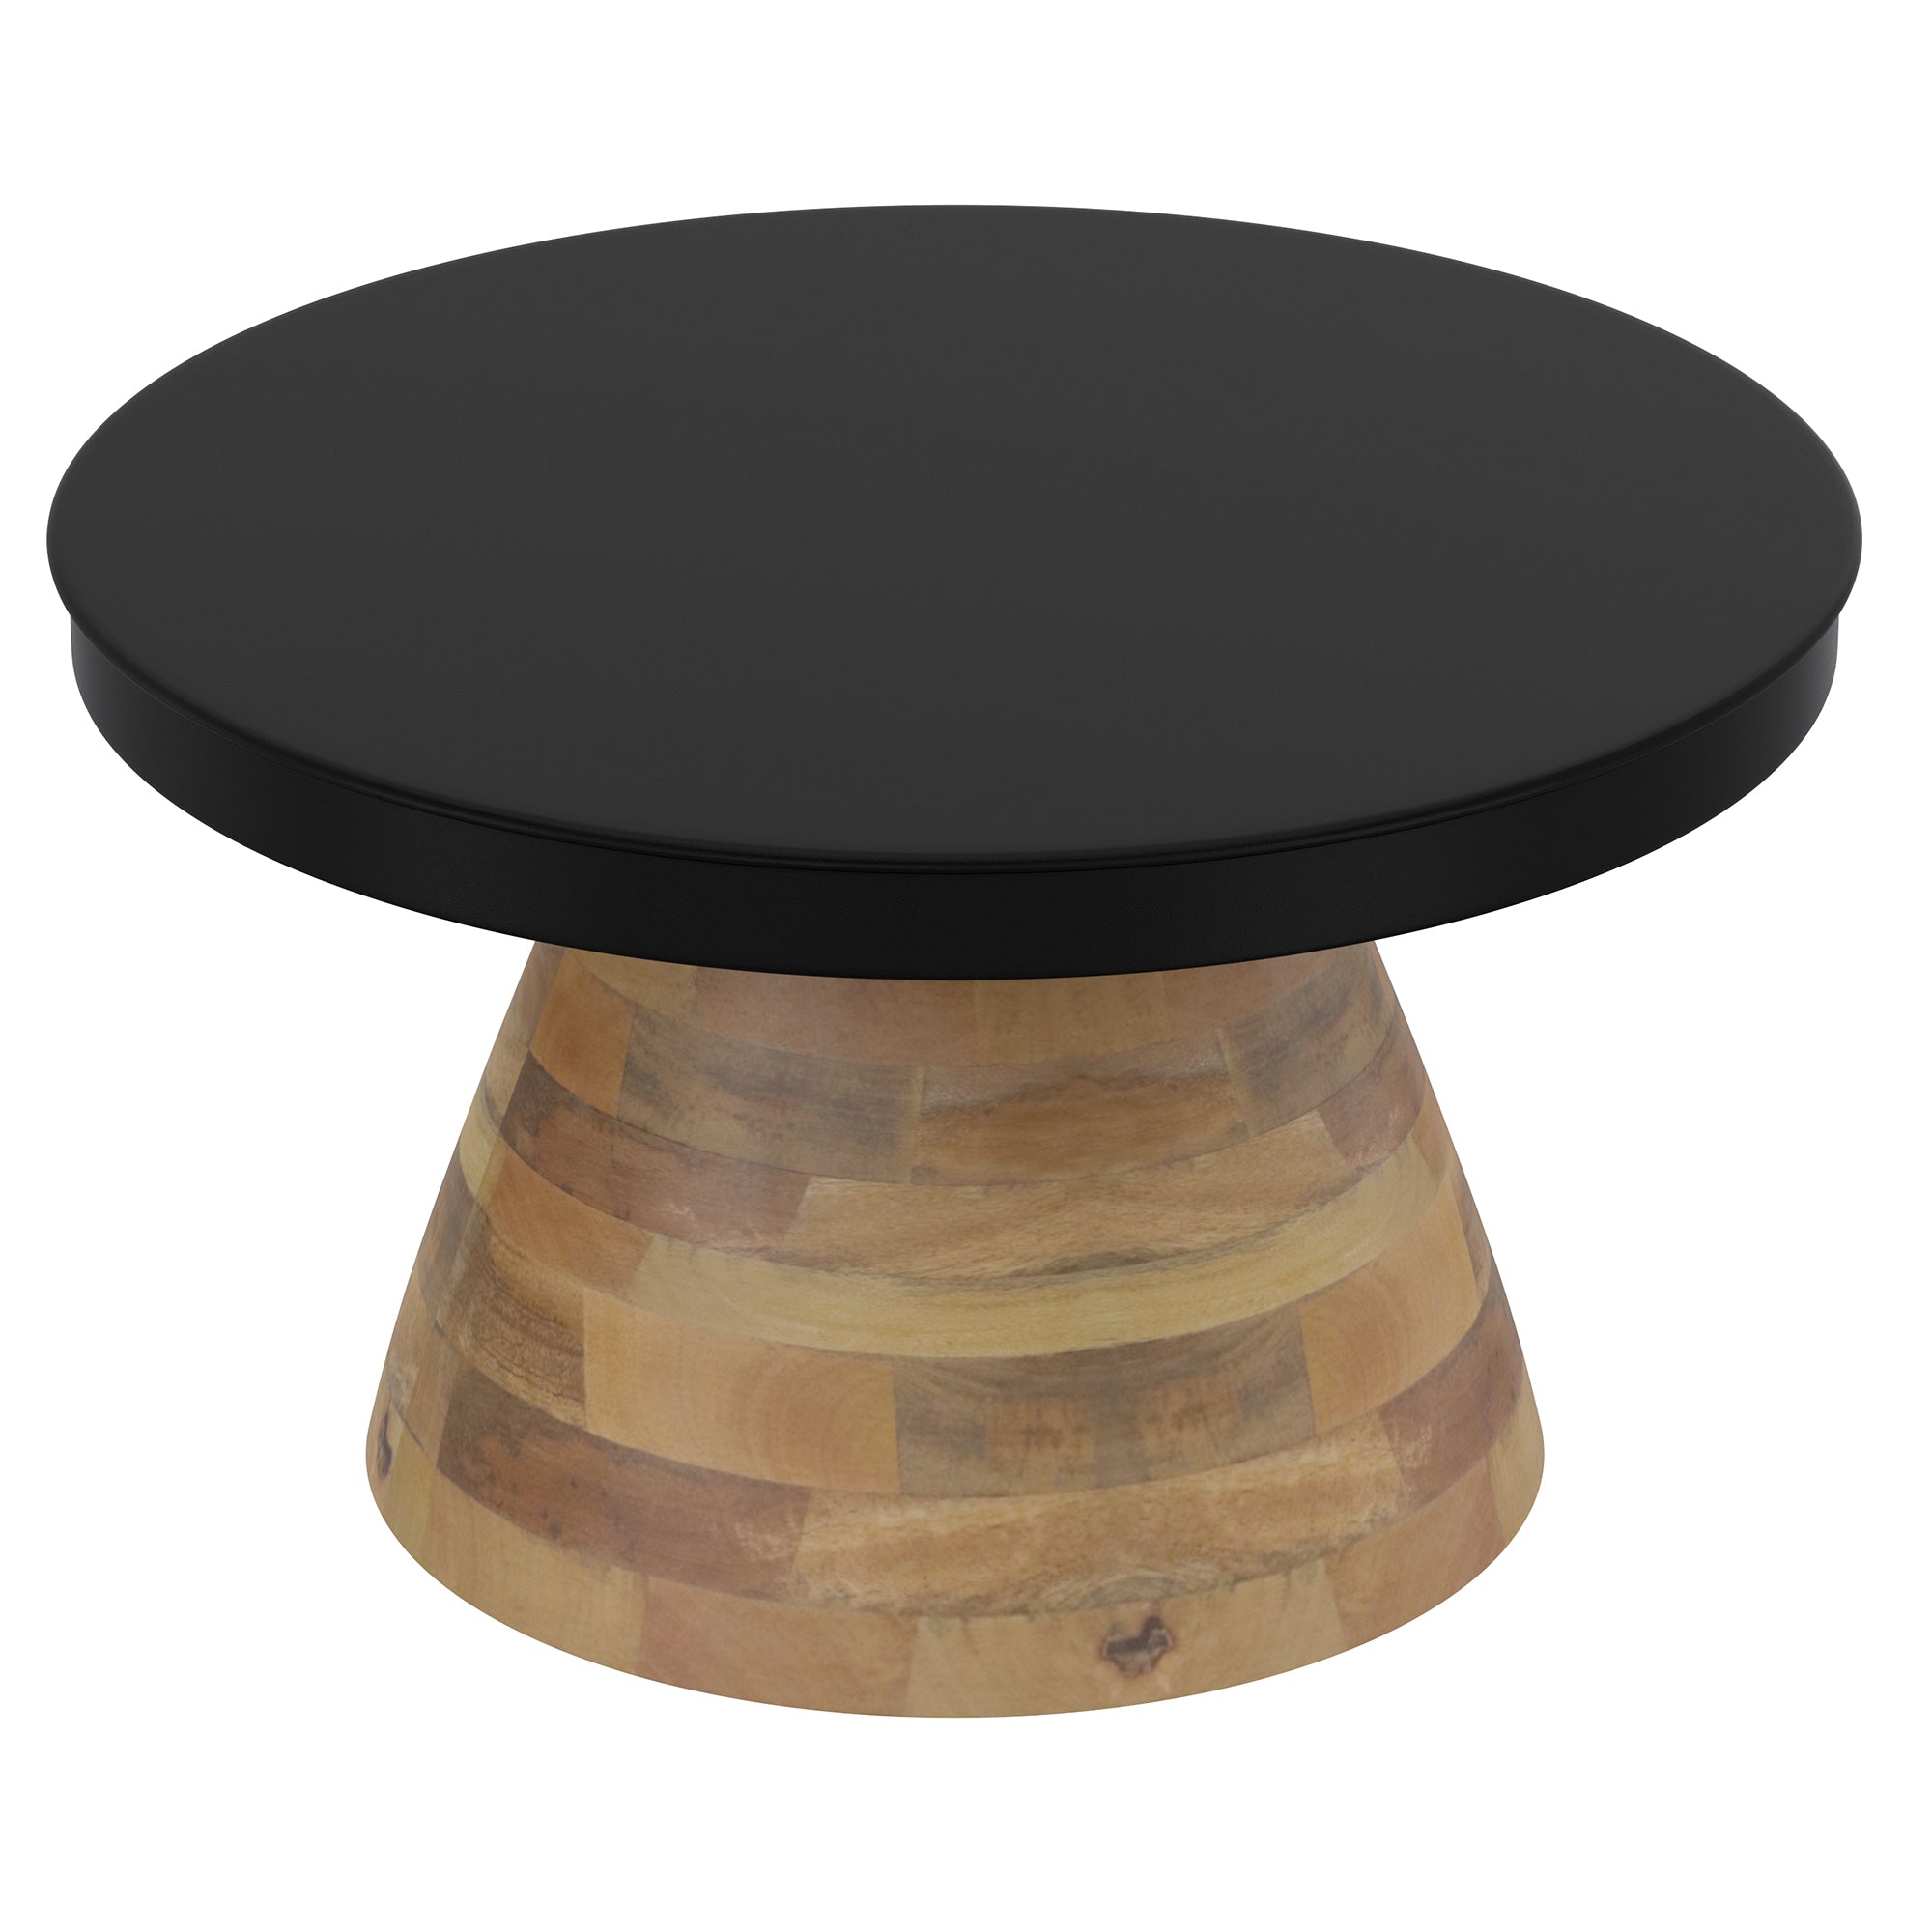 BODEN-COFFEE TABLE-BLACK